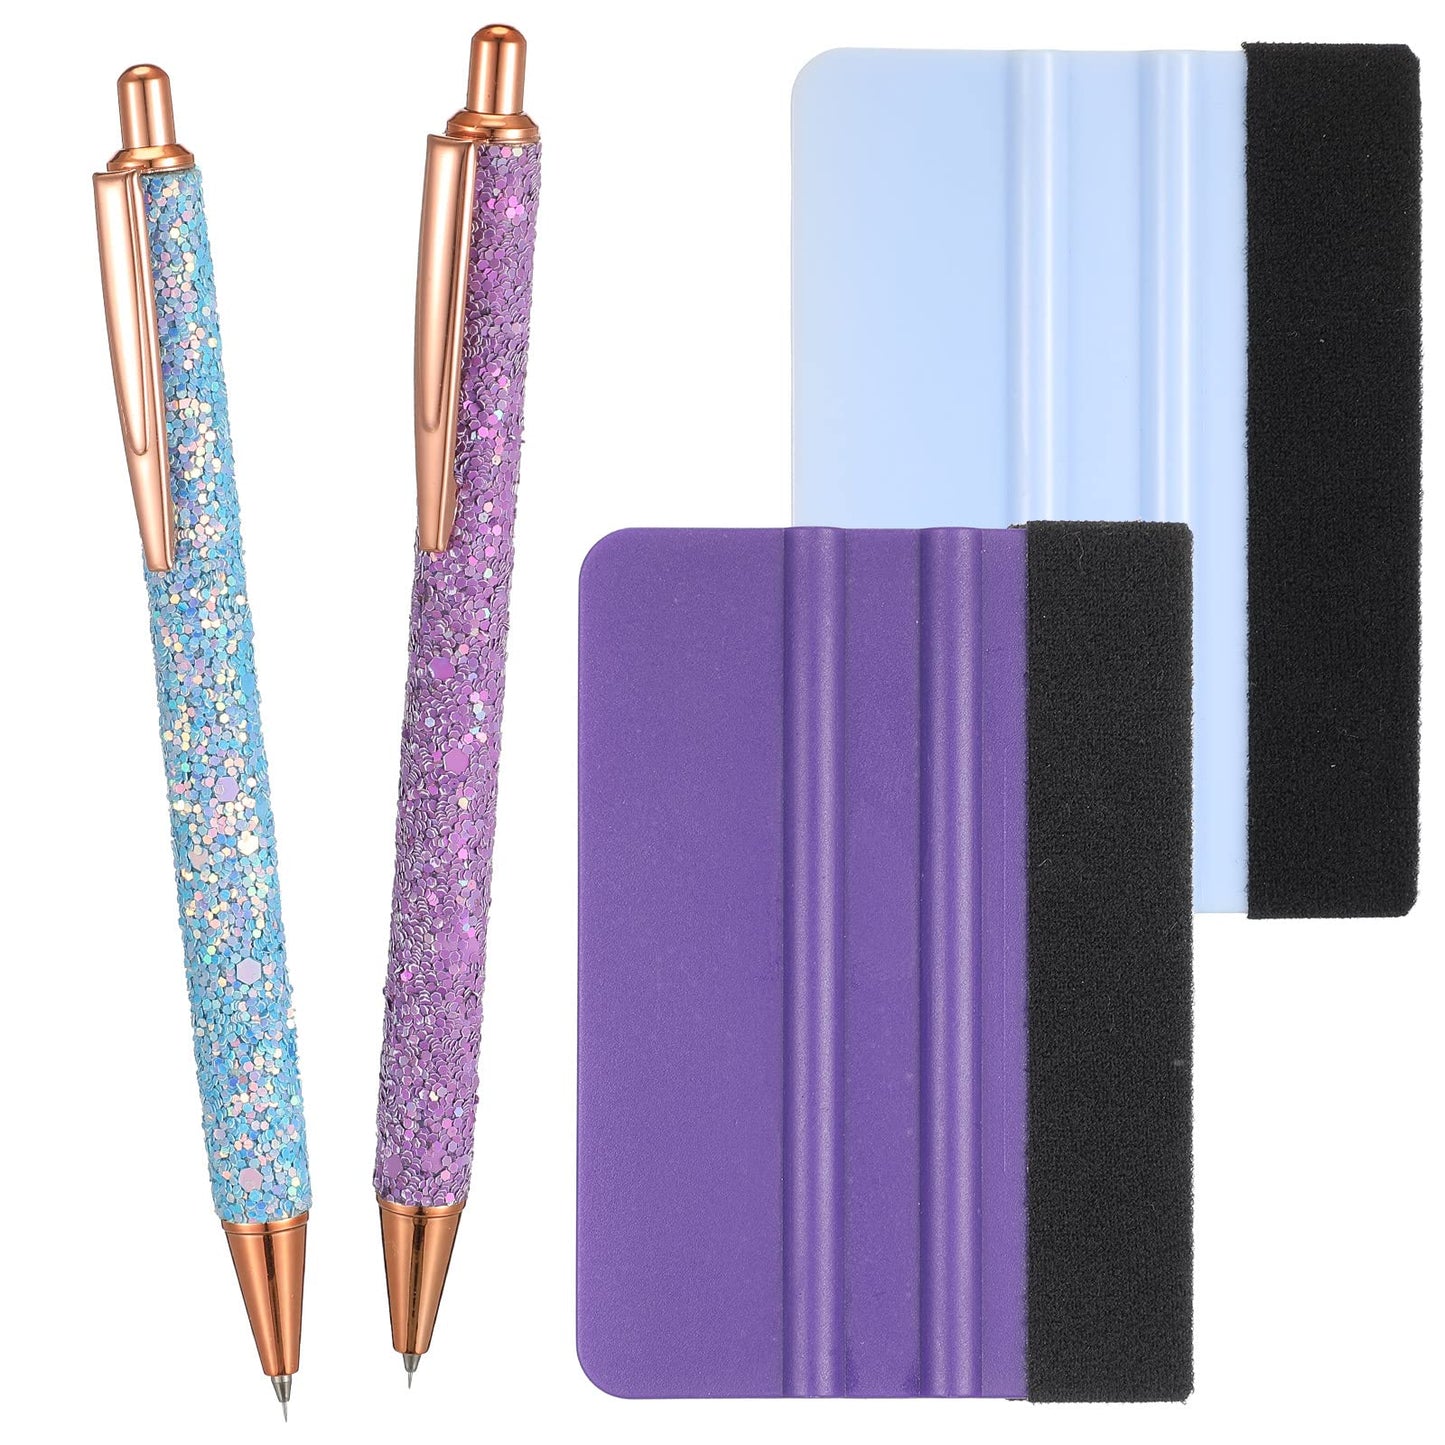 4 Pieces Weeding Tools for Vinyl, Includes 2 Pieces Glitter Craft Vinyl Weeding Pin Pen Retractable Air Release Weeding Pen with 2 Pieces Scrapers and 2 Pieces Refills for Squeegee Craft Weeding